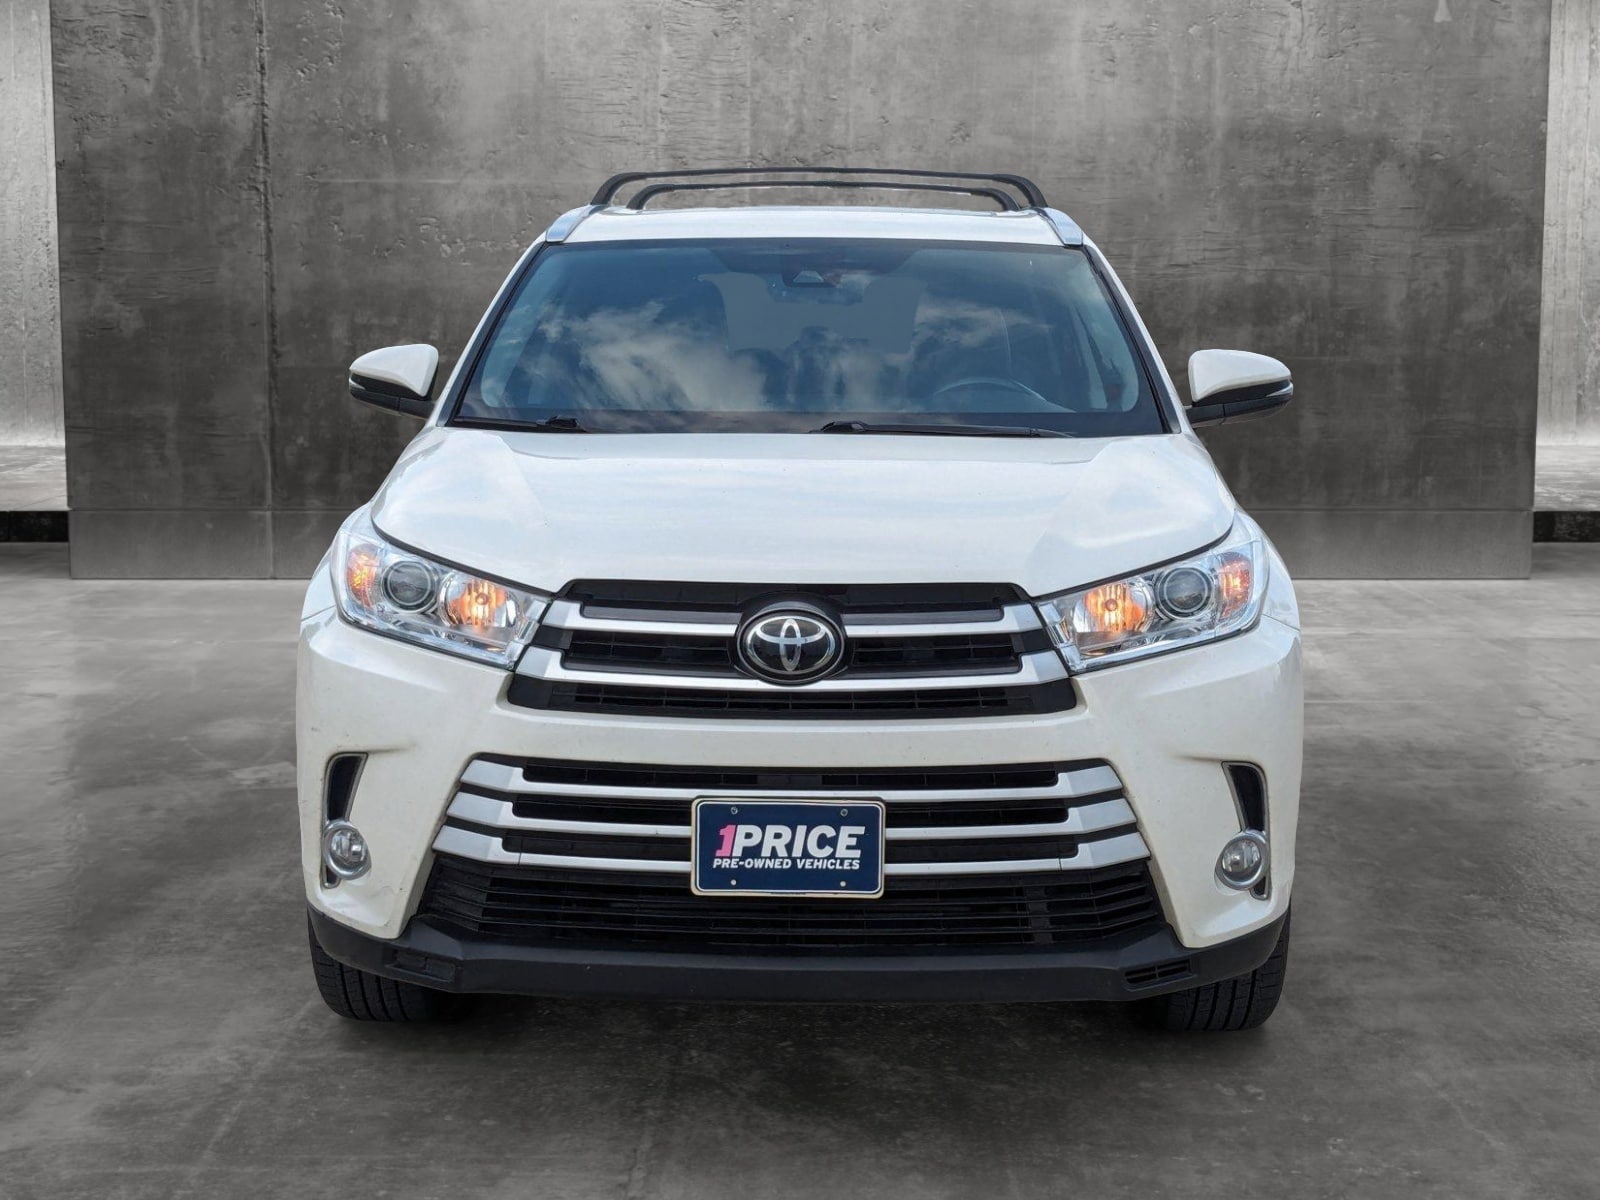 Used 2017 Toyota Highlander XLE with VIN 5TDKZRFH3HS522758 for sale in Houston, TX